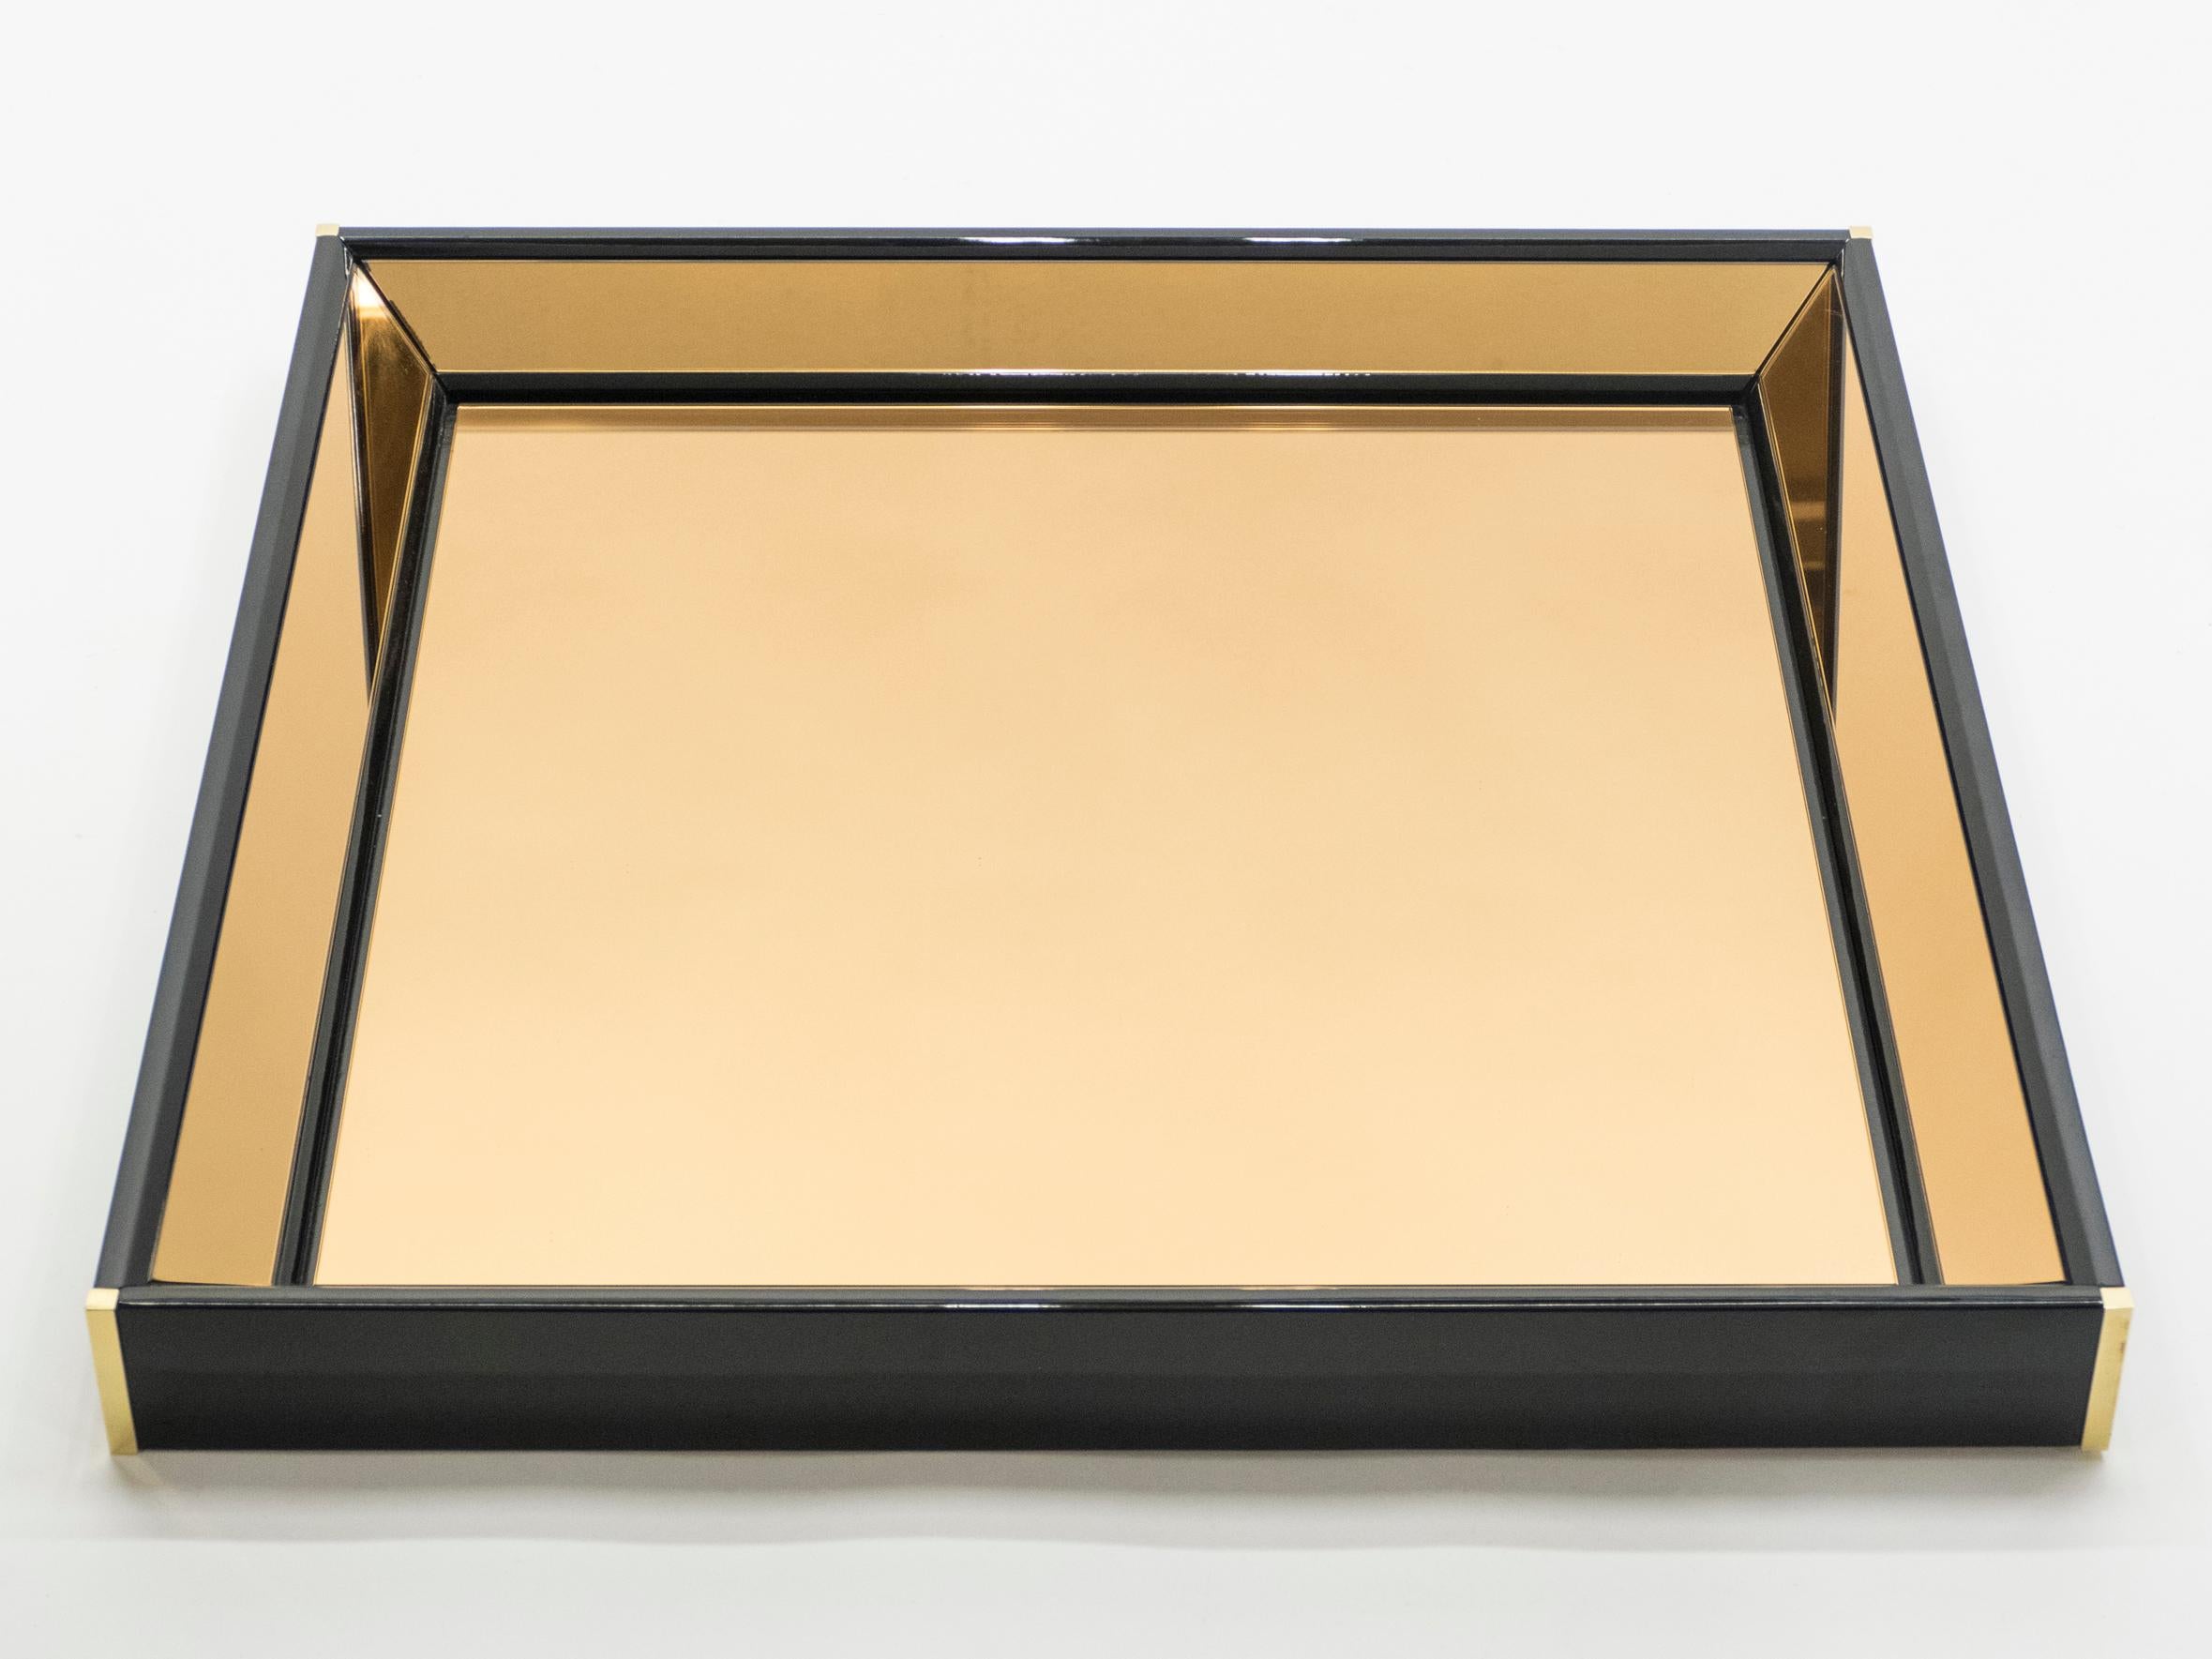 This Italian Hollywood Regency black lacquered mirror would be stunning in any room. The shiny black lacquer coating is the appropriate match to the bronze-tinted mirror frame, both reflecting light in a subdued way and creating a chic color